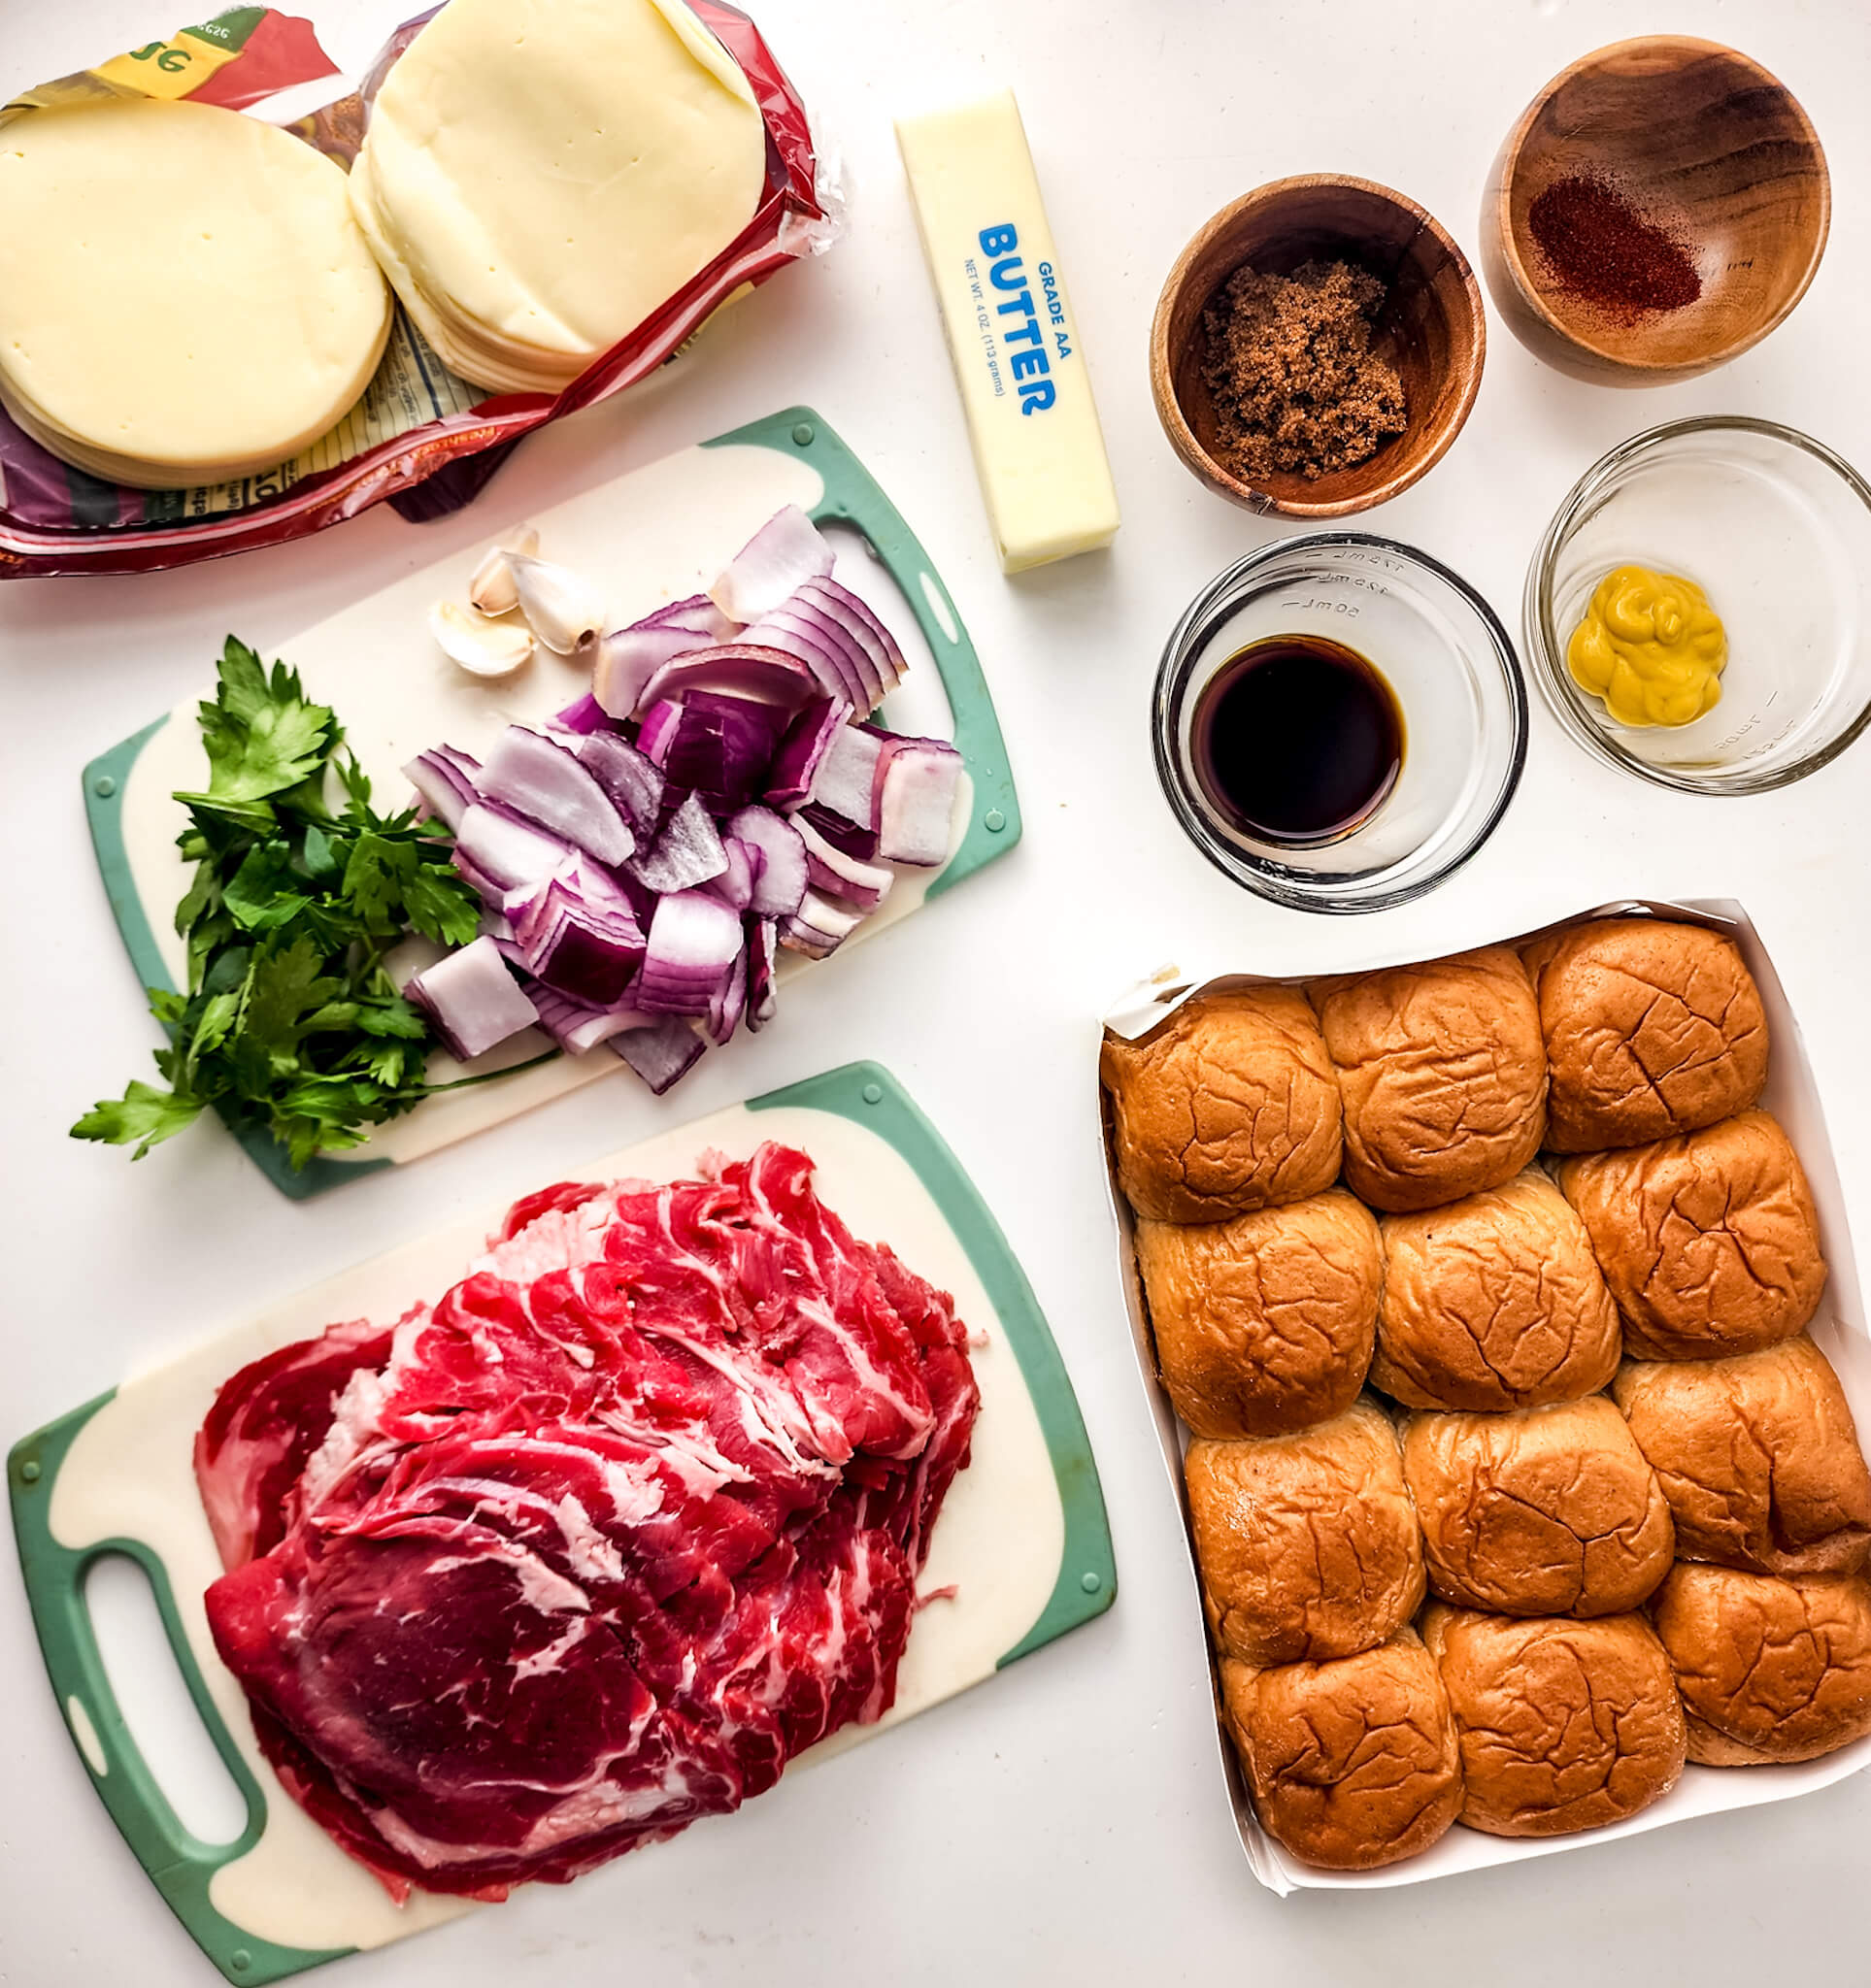 Ingredients for steak and cheese sliders laid out on a counter, including steak, buns, cheese, butter, spices, and condiments.